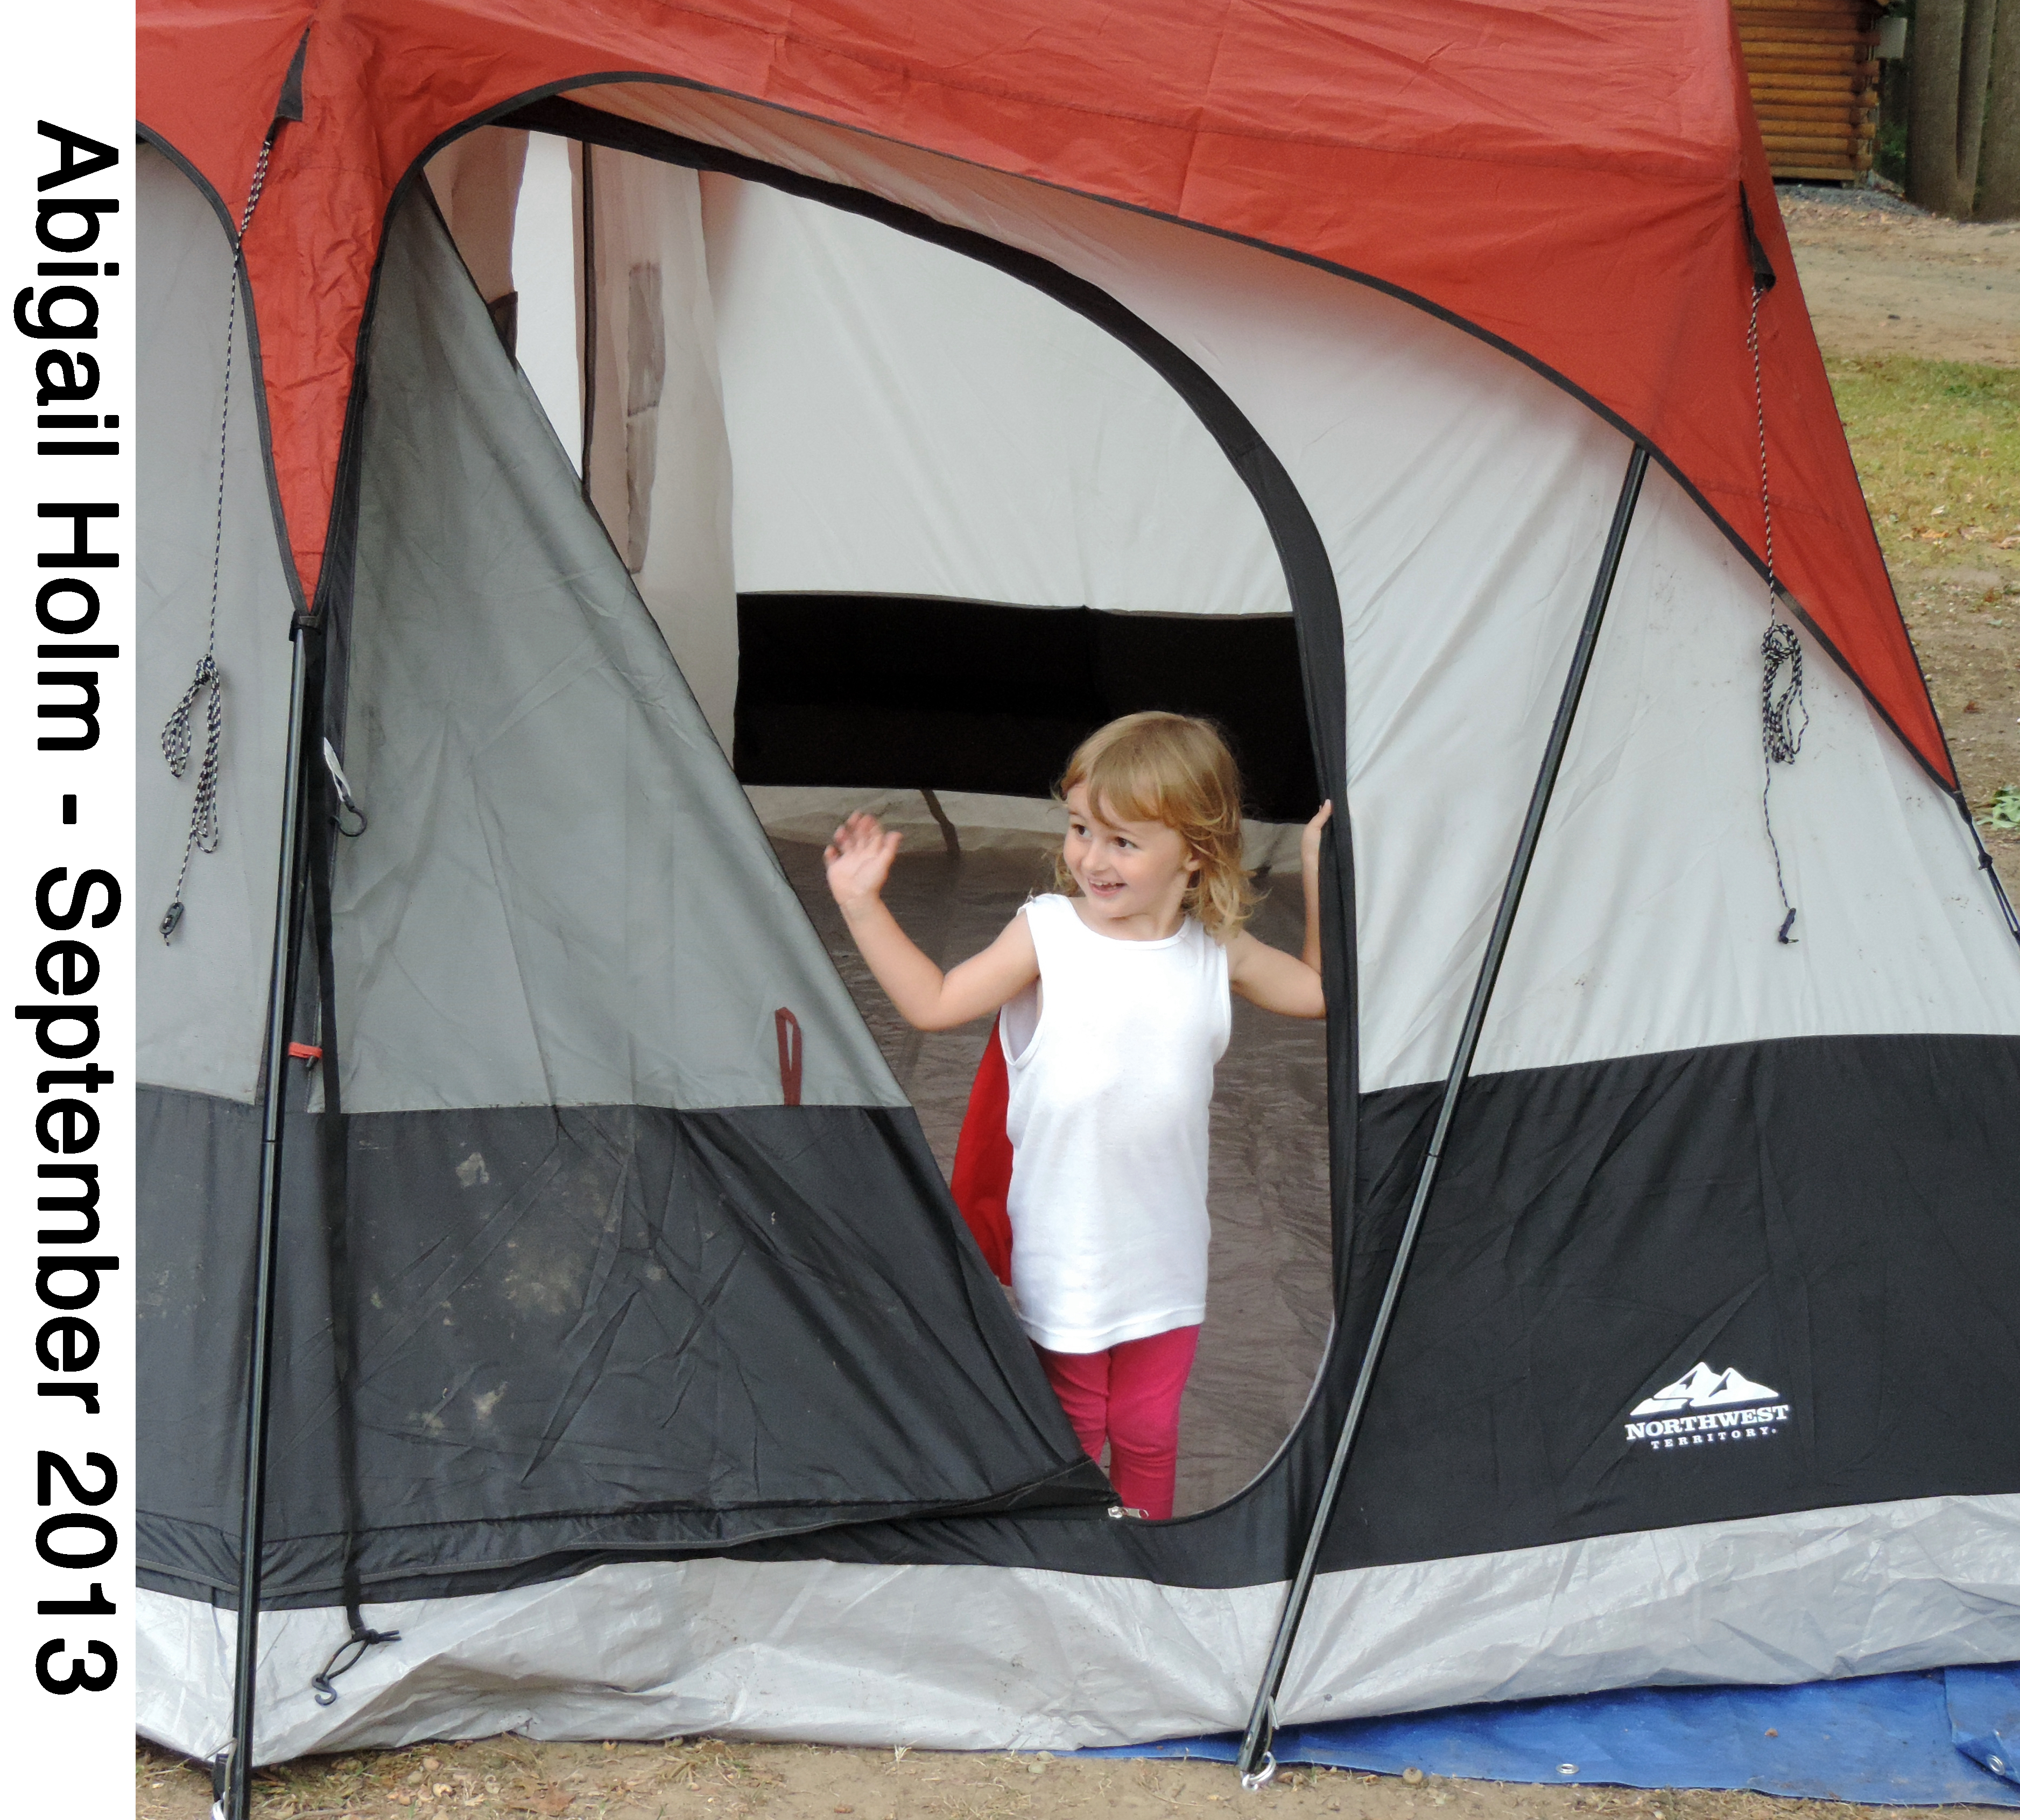 Abigail Holm waves from the door of her family’s tent